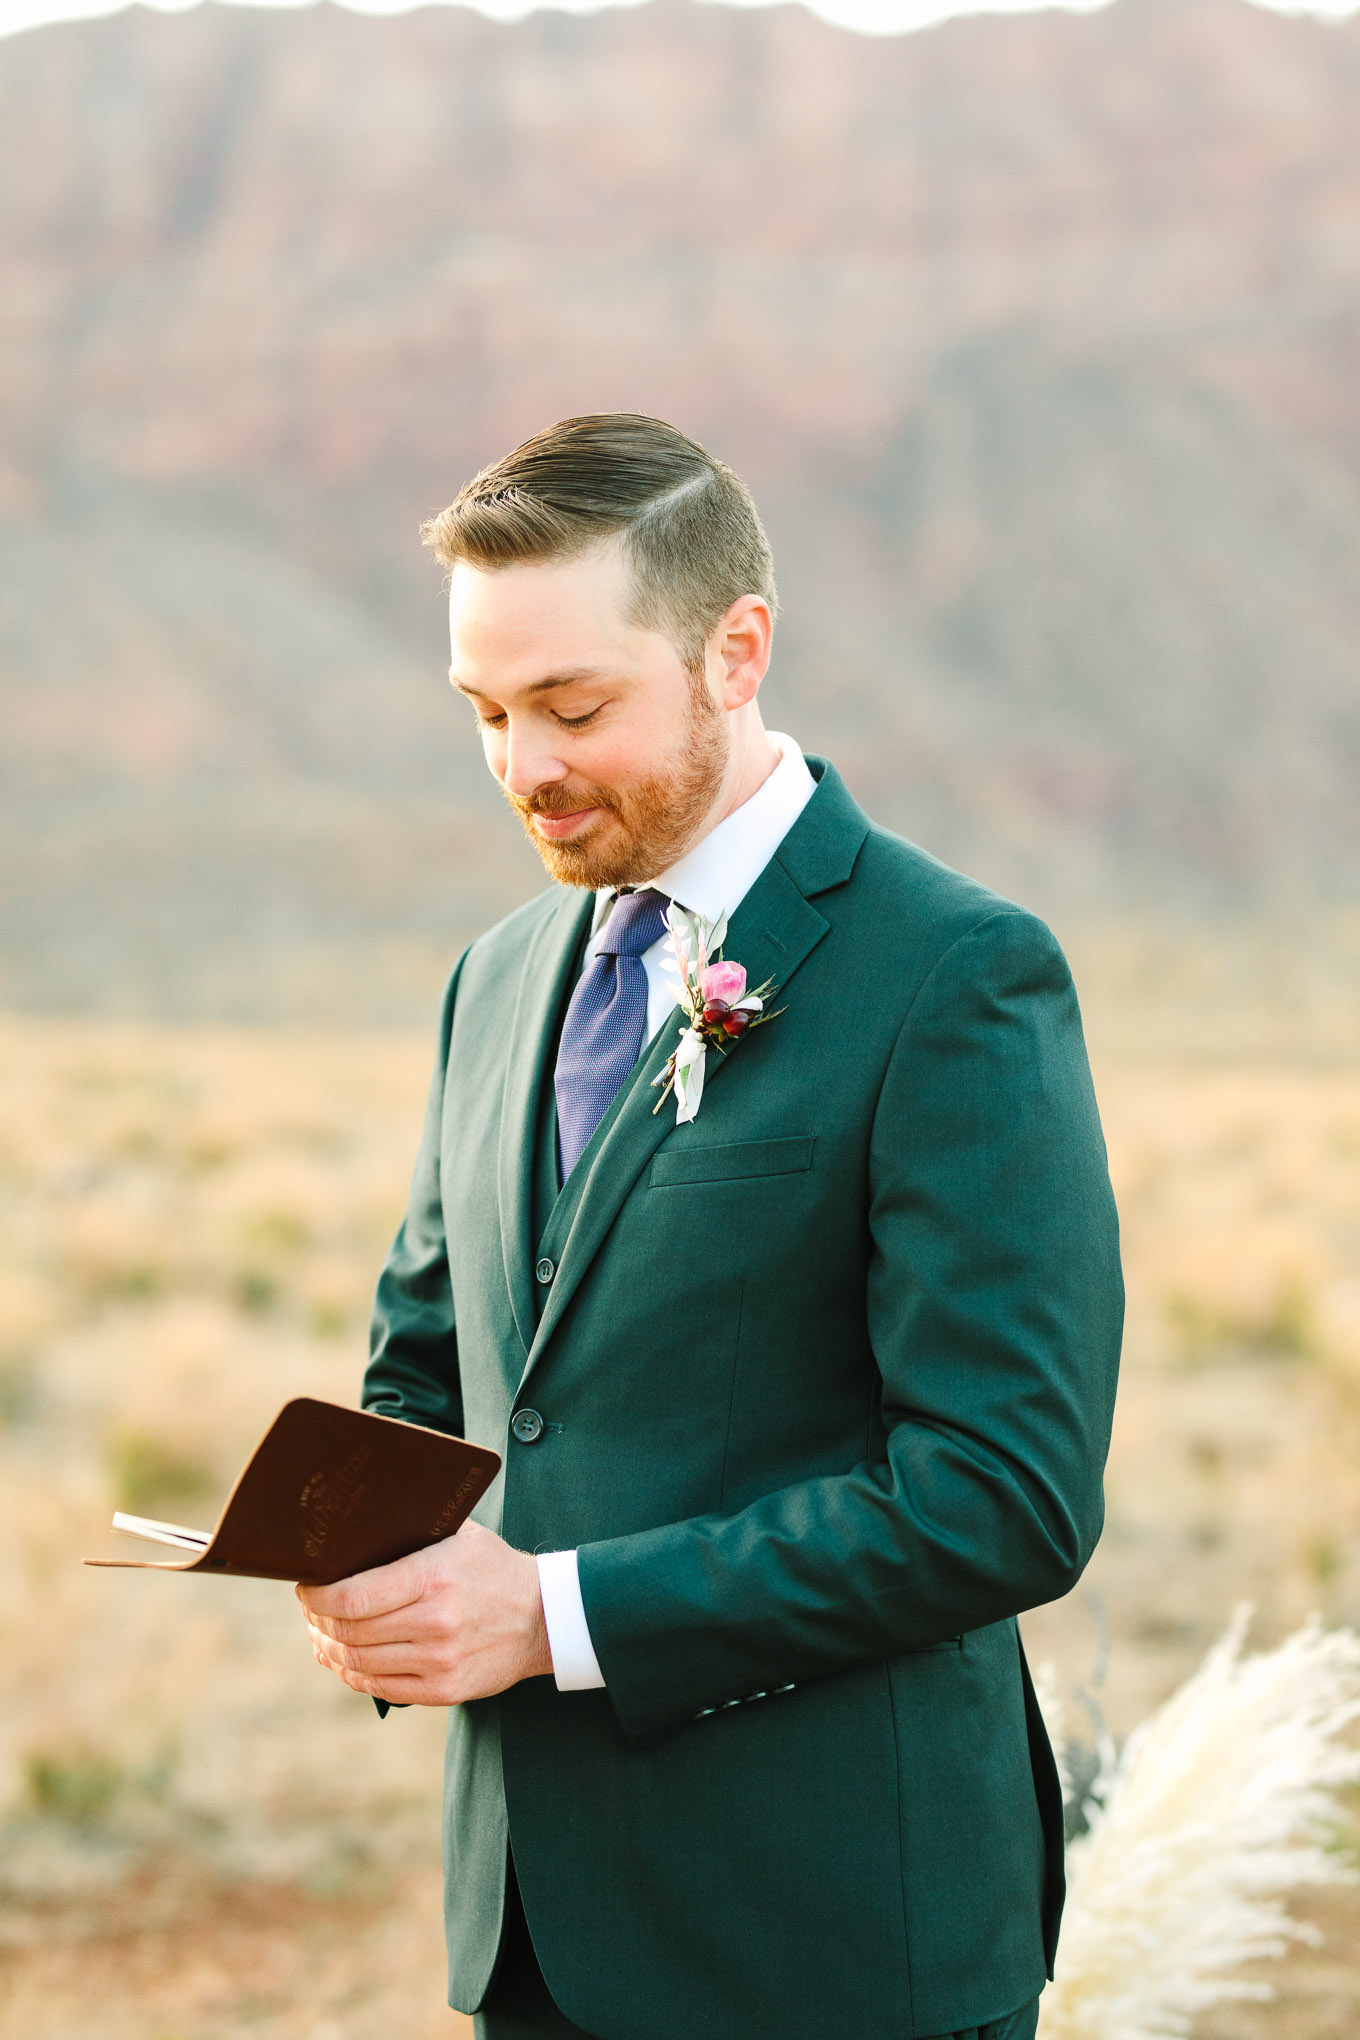 Groom reading vows | Zion Under Canvas camping elopement at sunrise | Colorful elopement photography | #utahelopement #zionelopement #zionwedding #undercanvaszion #sunriseelopement #adventureelopement  Source: Mary Costa Photography | Los Angeles